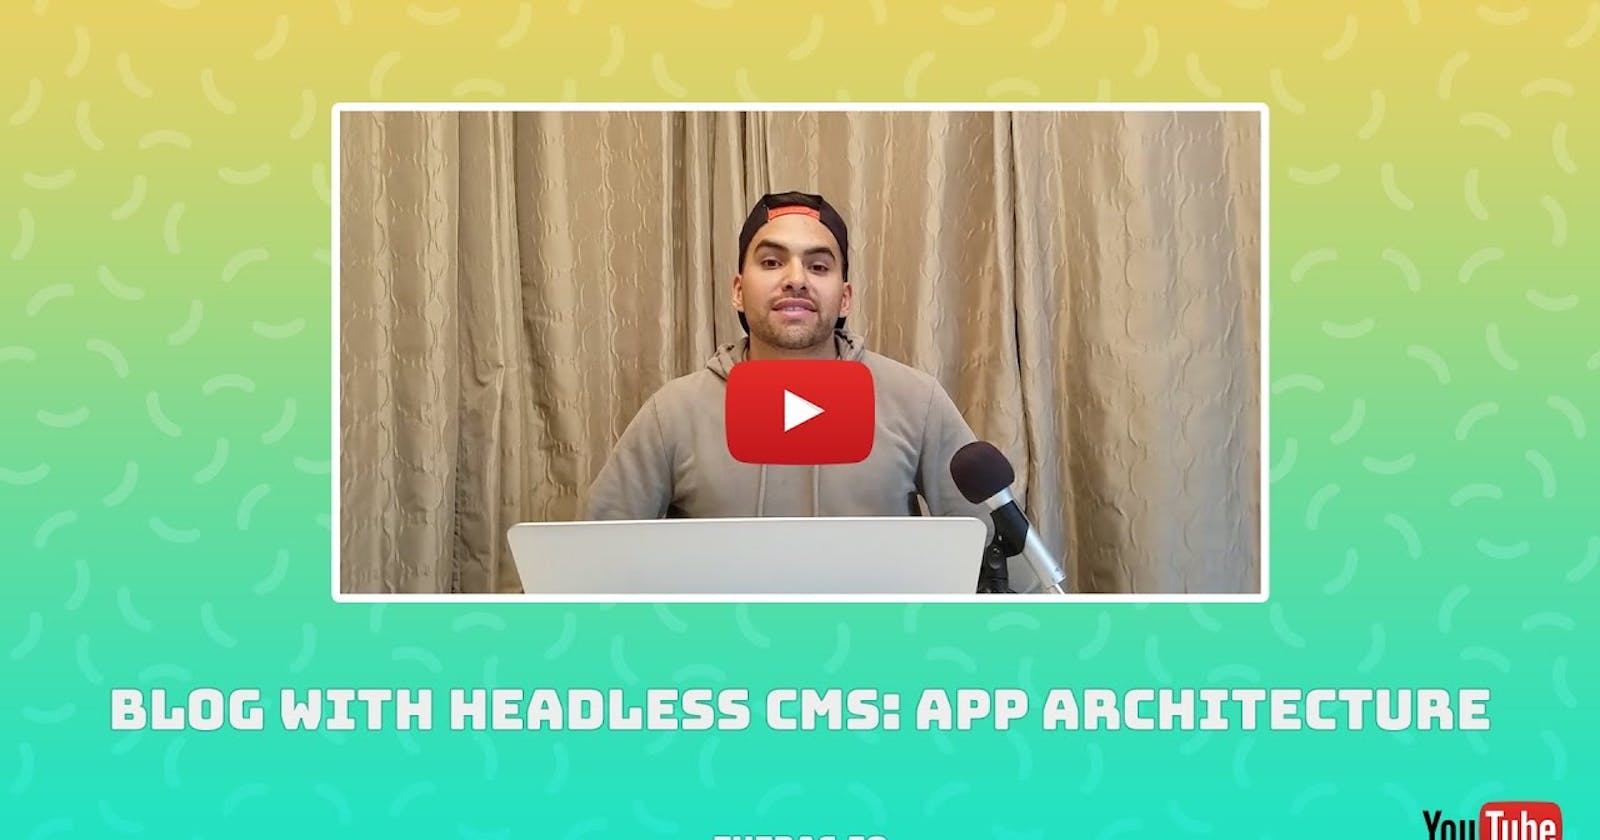 Blog With Headless CMS: App Architecture - YouTube